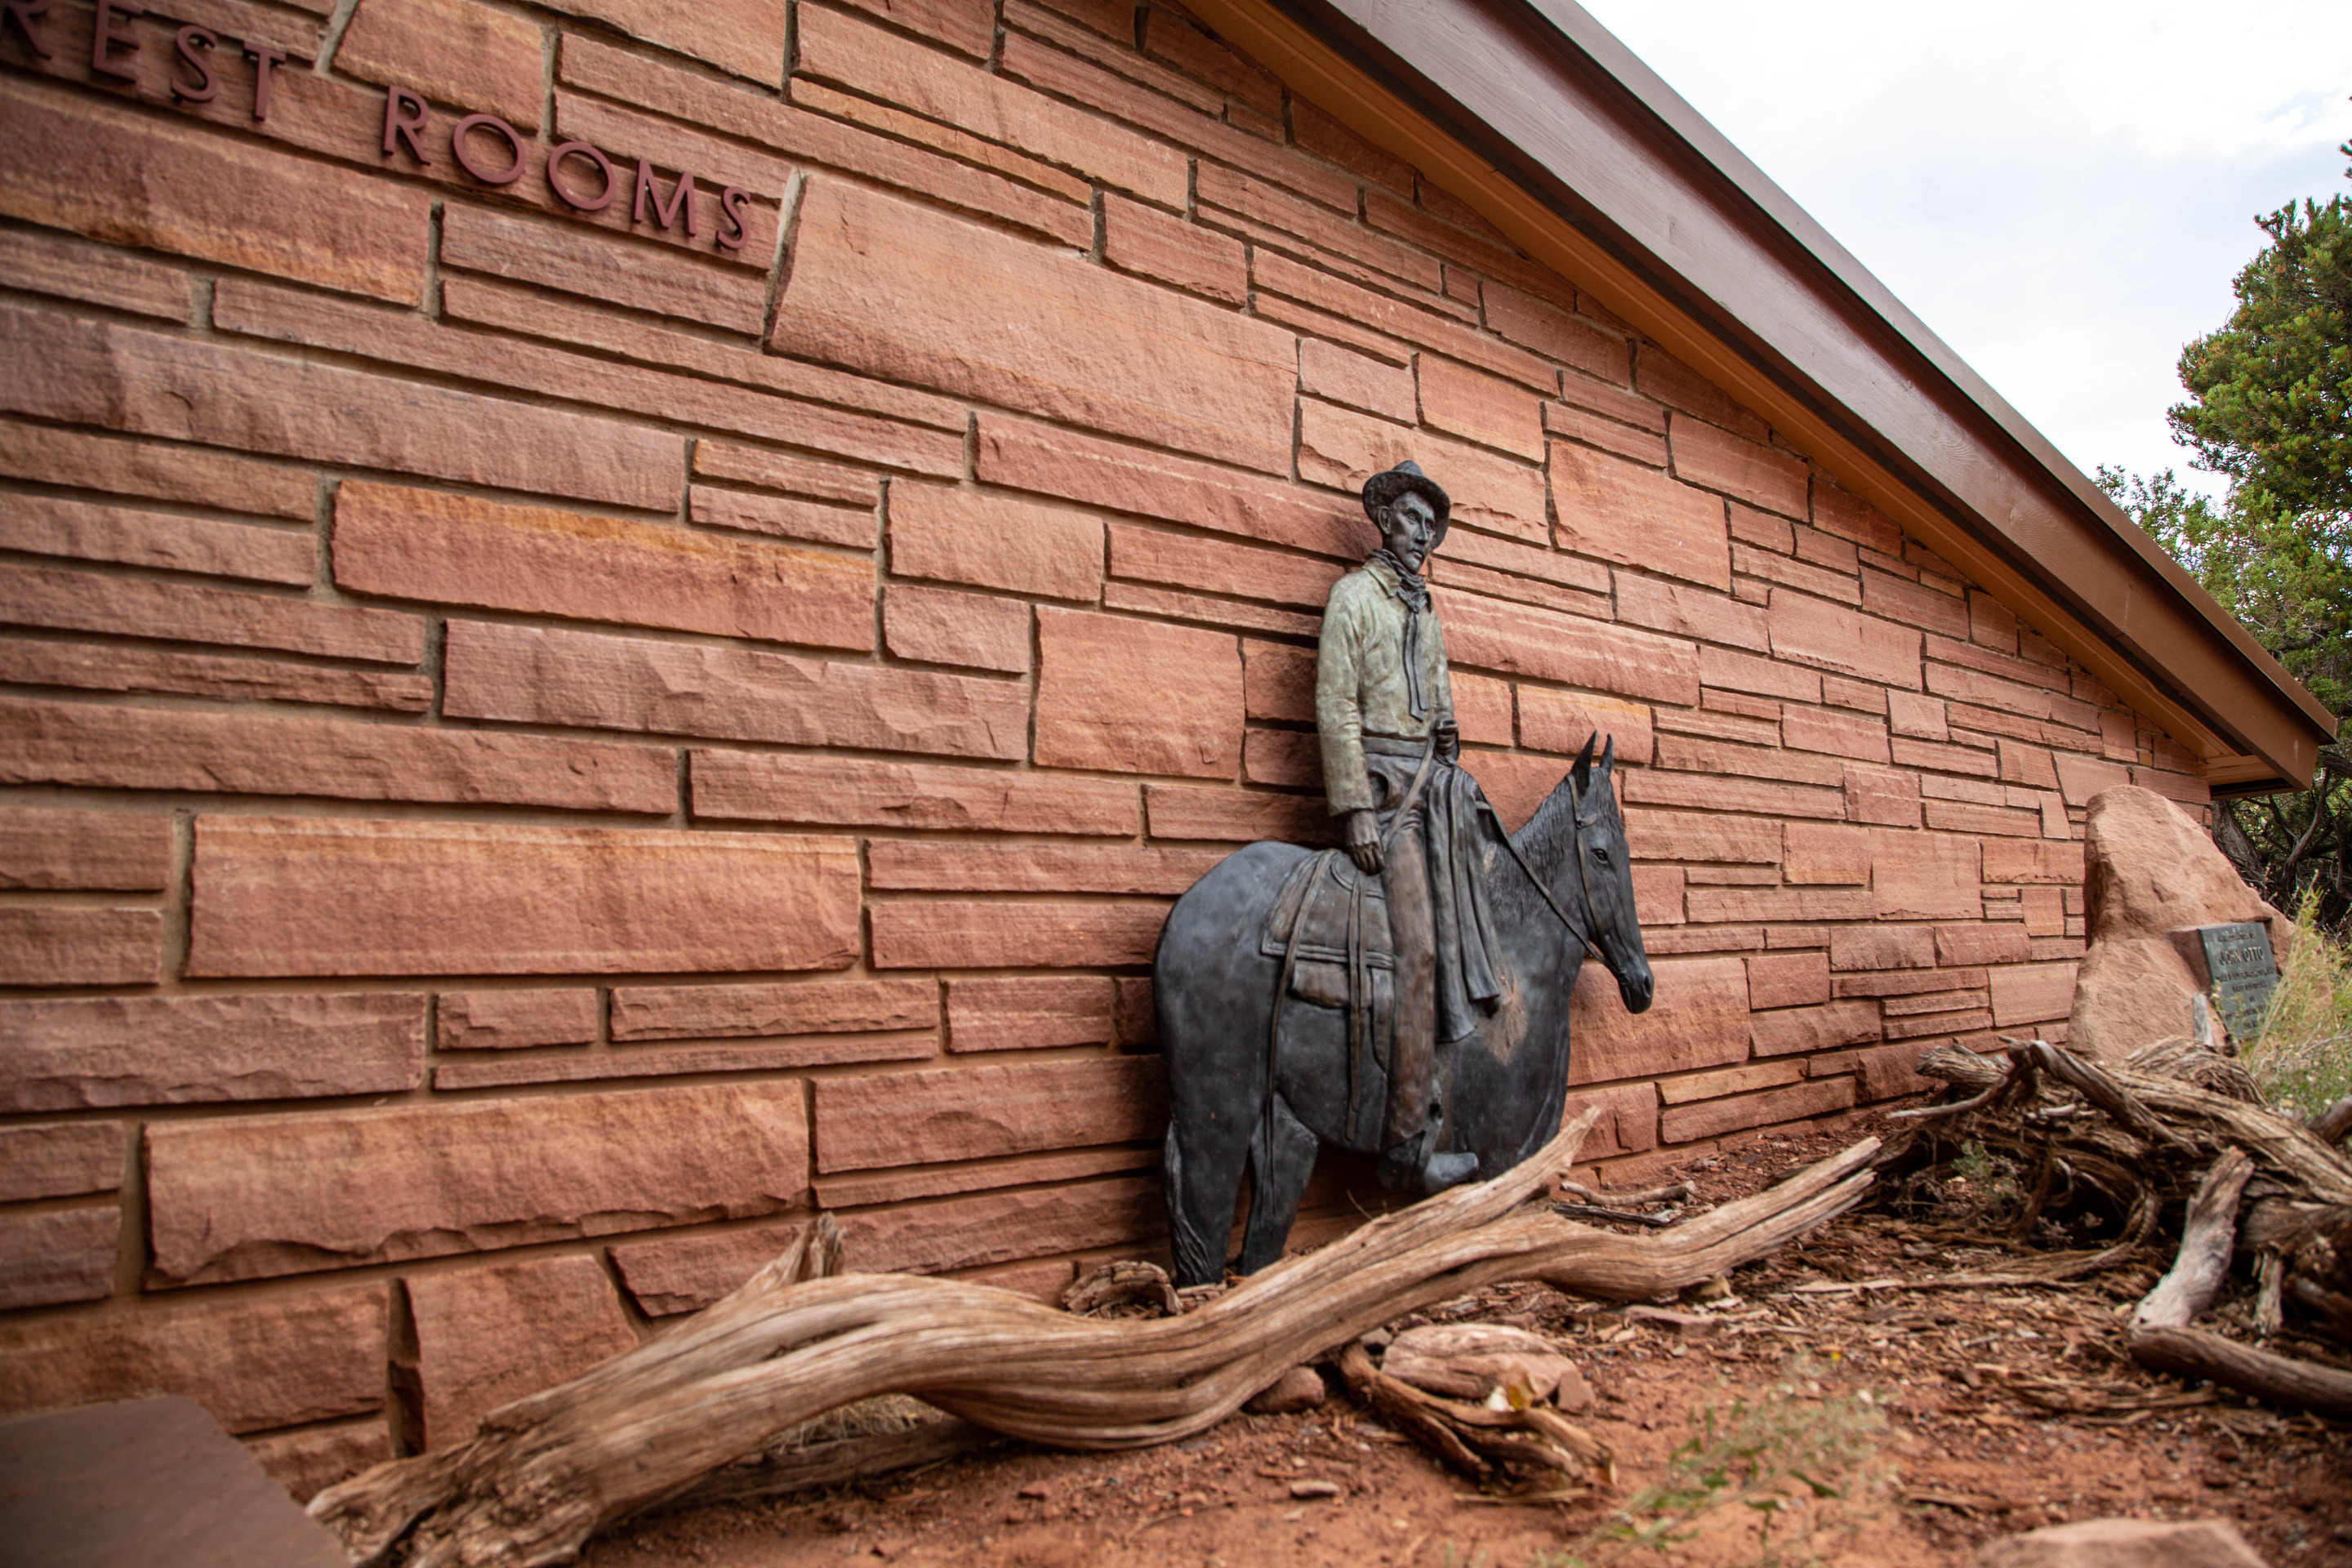 Flat, metal statue of John Otto on horseback standing against the visitor center wall